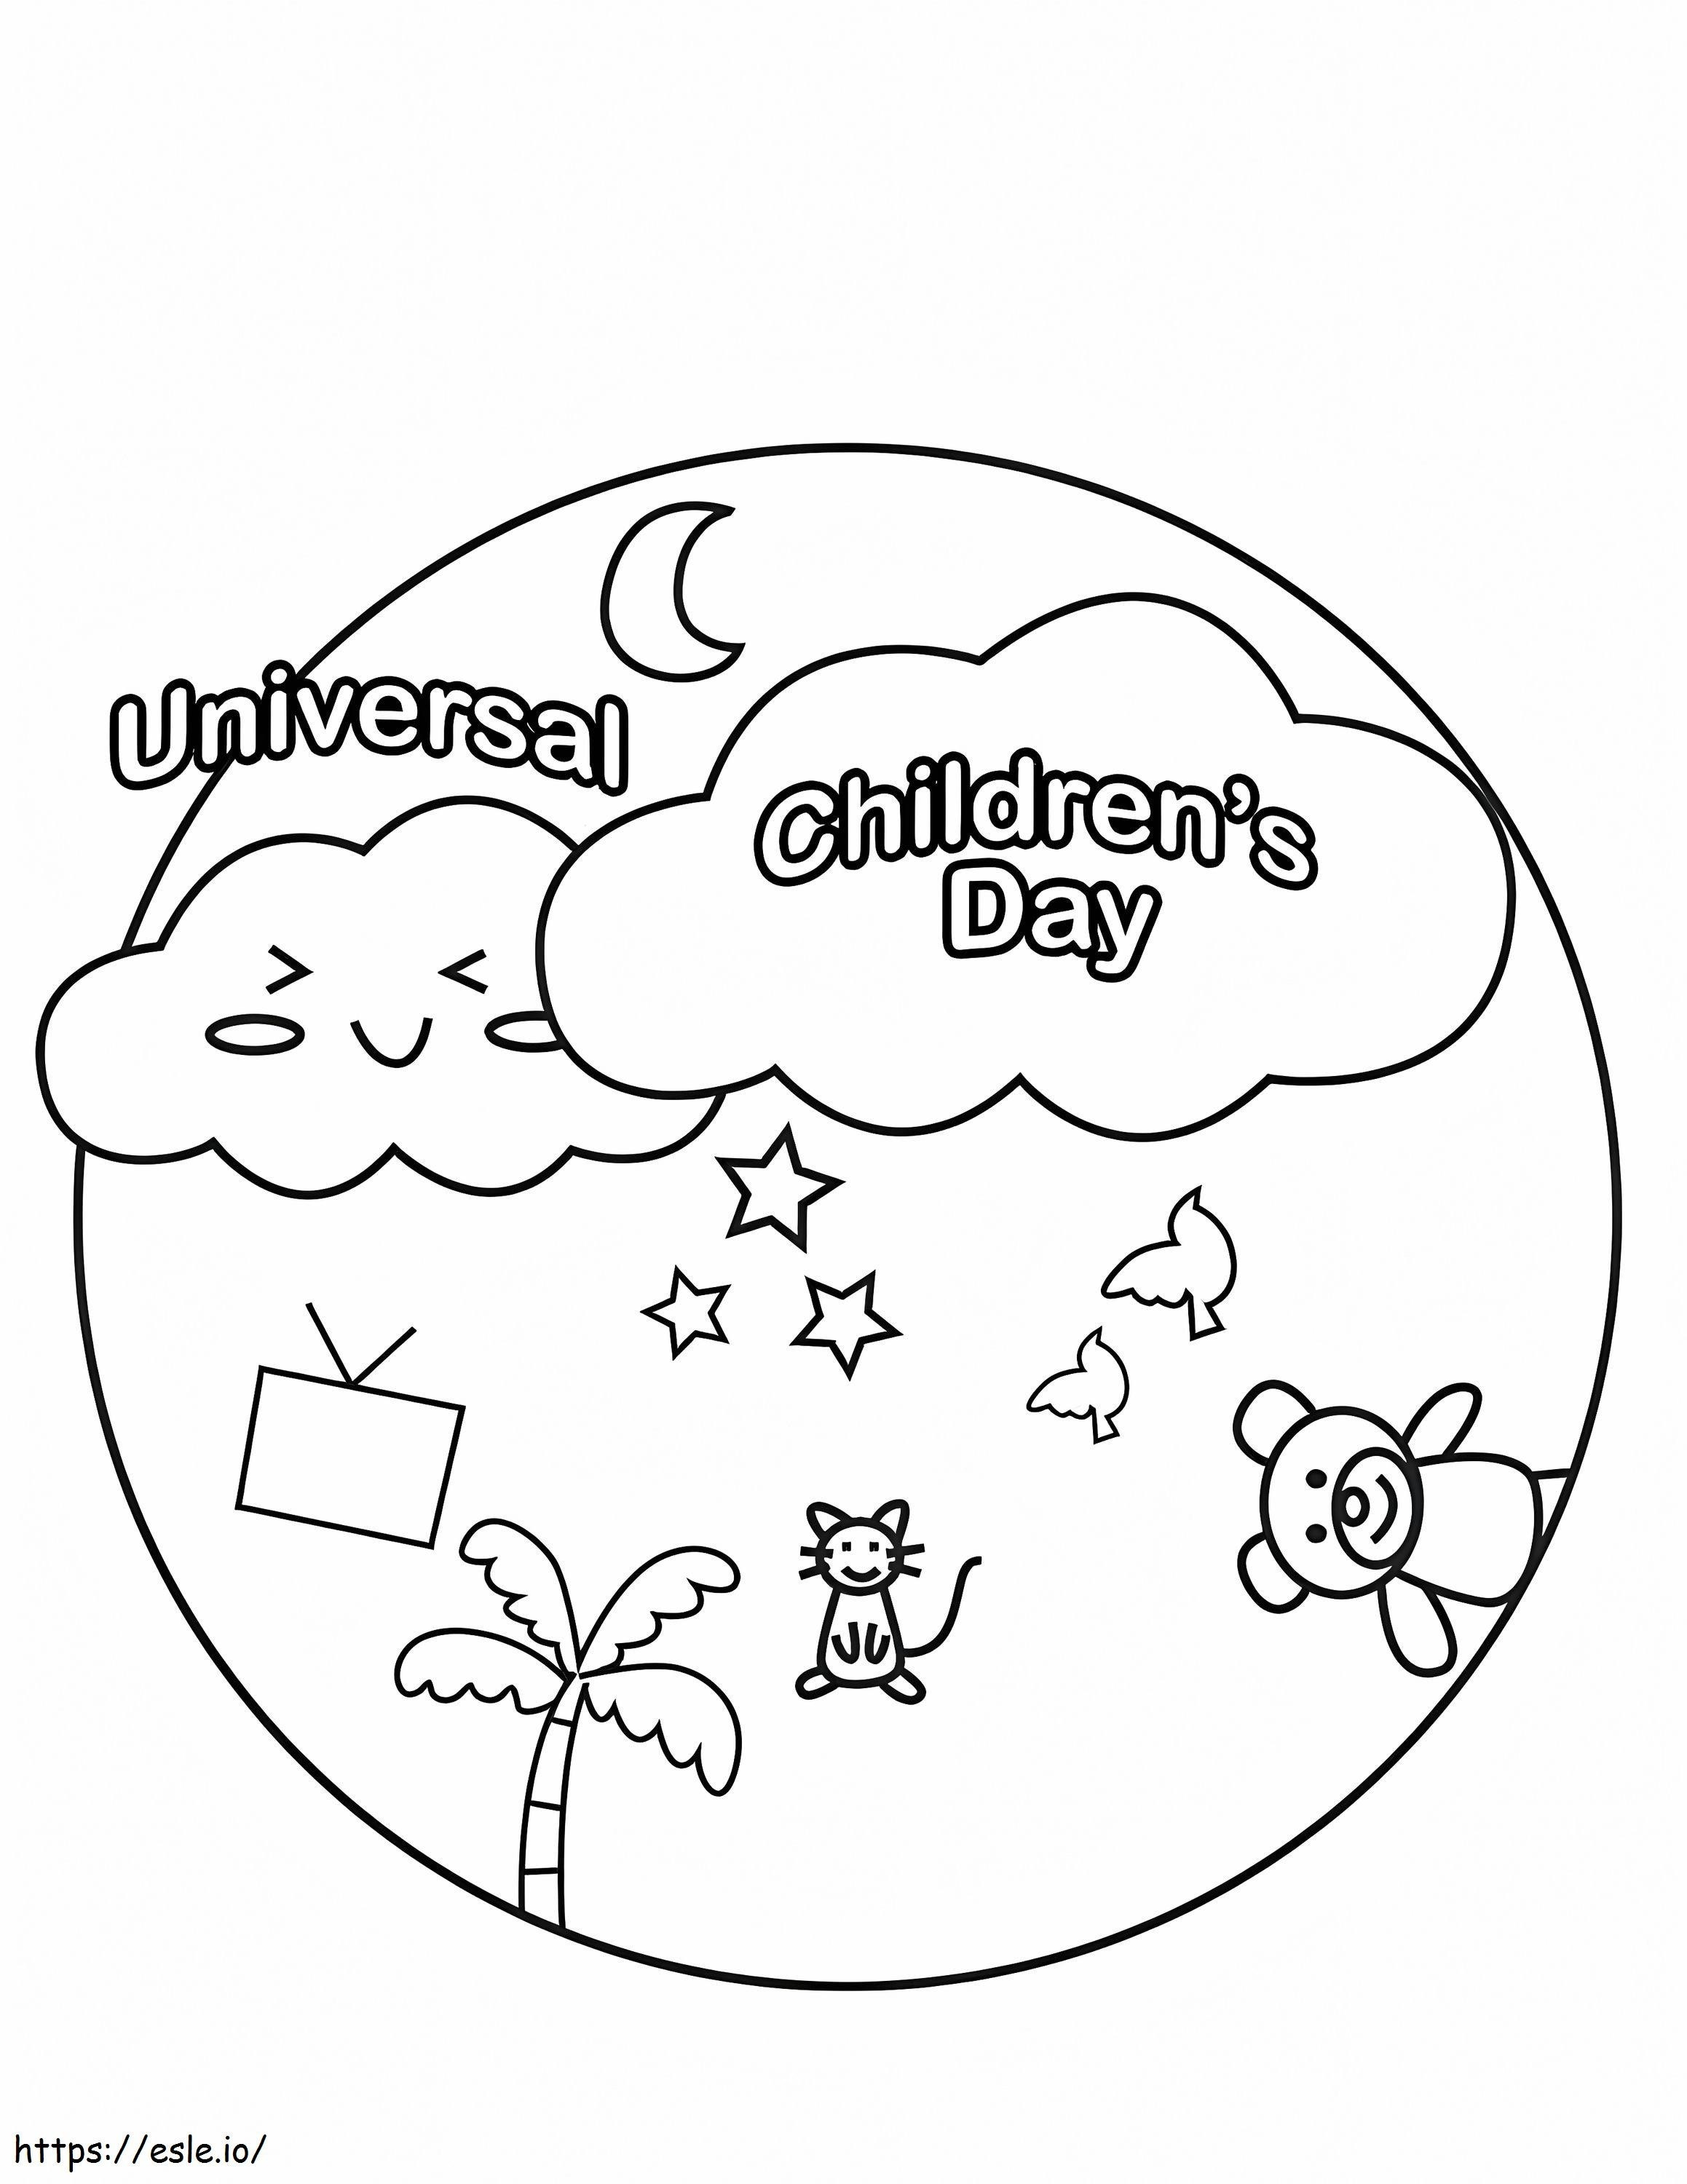 International Childrens Day coloring page